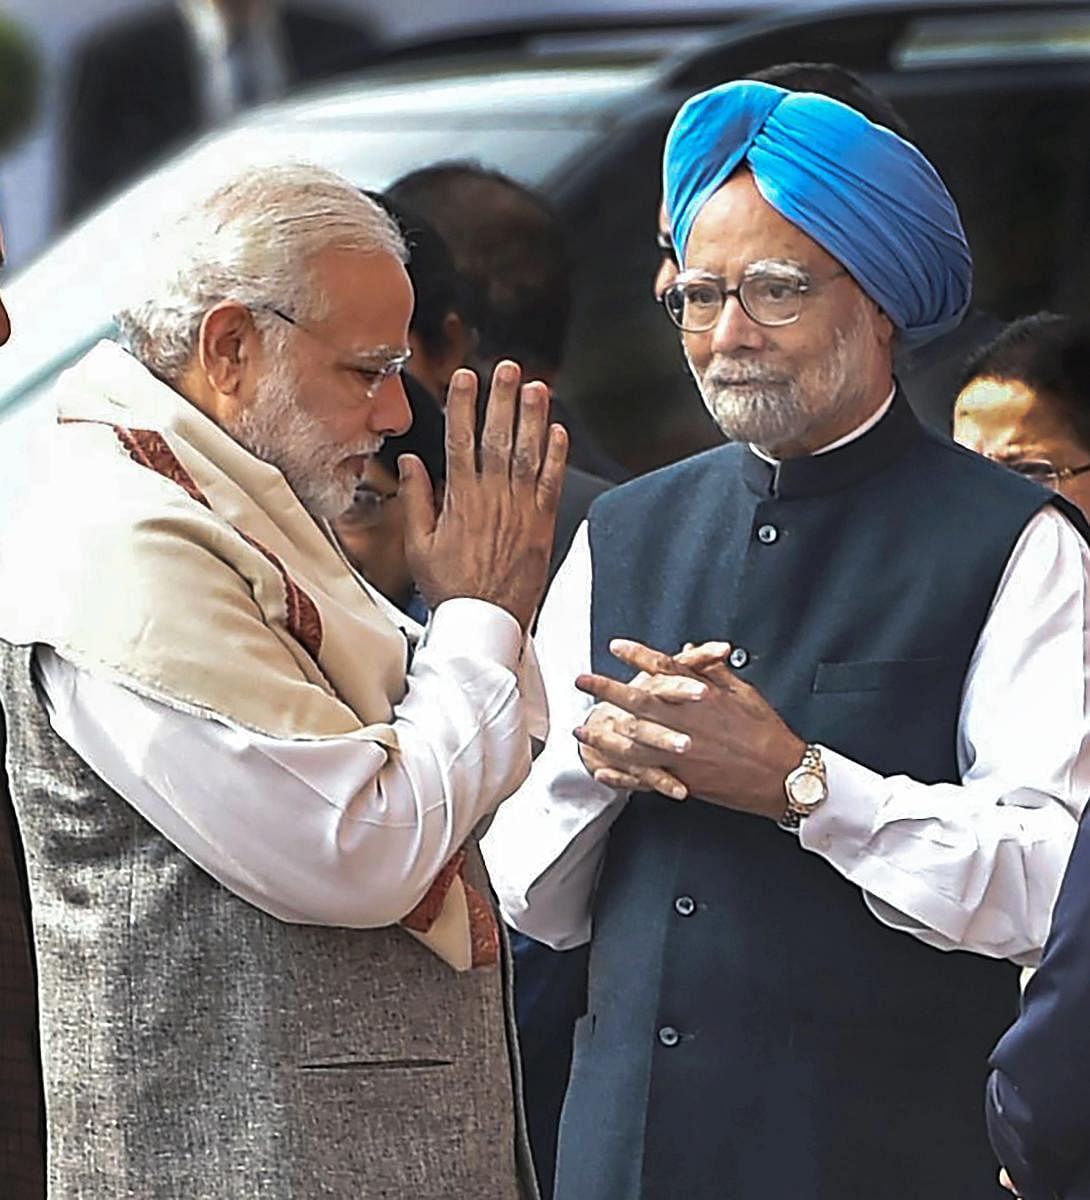 New Delhi: Prime Minister Narendra Modi and former prime minister Manmohan Singh exchange greetings during the tribute paying ceremony for the martyrs of 2001 Parliament attack on its 16th anniversary, at Parliament House in New Delhi on Wednesday. PTI Photo by Vijay Verma (PTI12_13_2017_000036B)